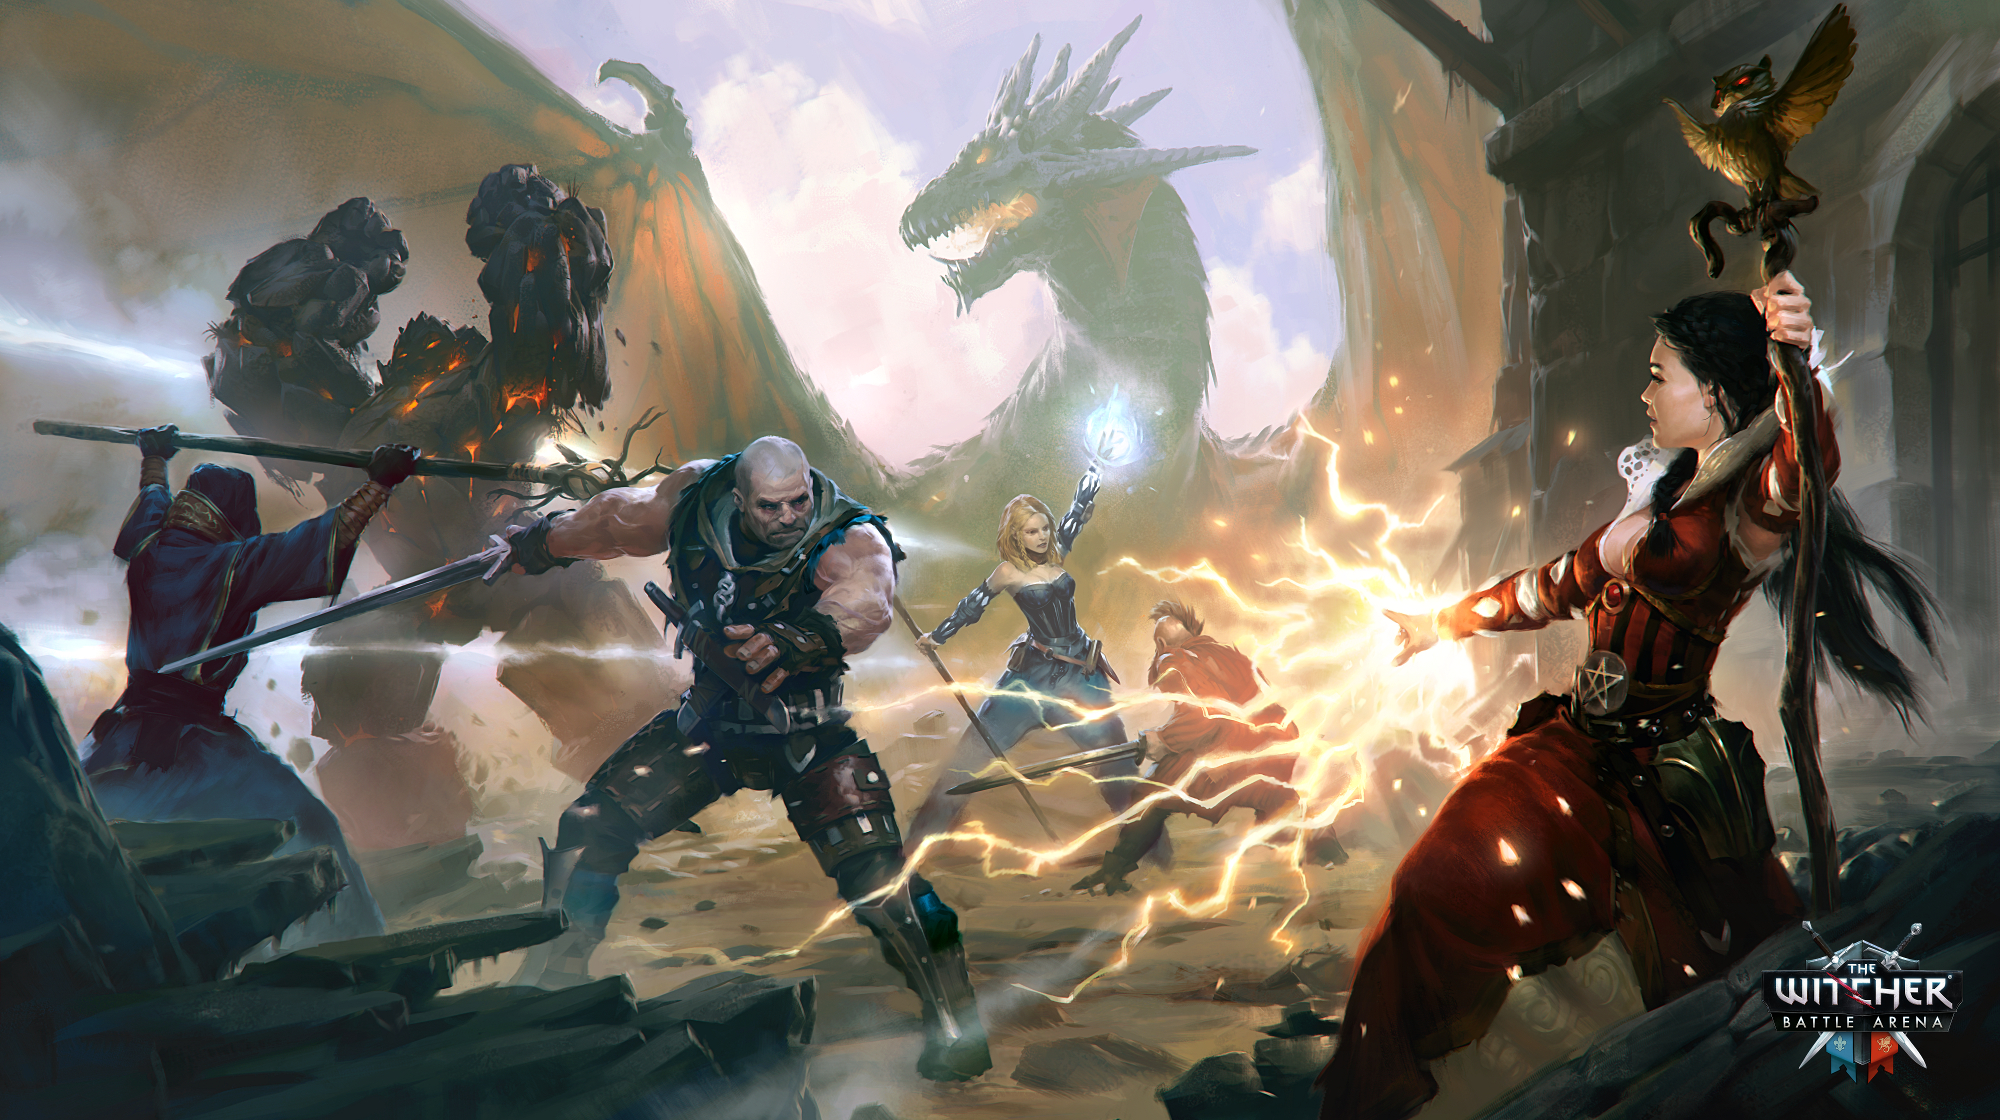 The Witcher Battle Arena is a free-to-play MOBA for iOS, Android